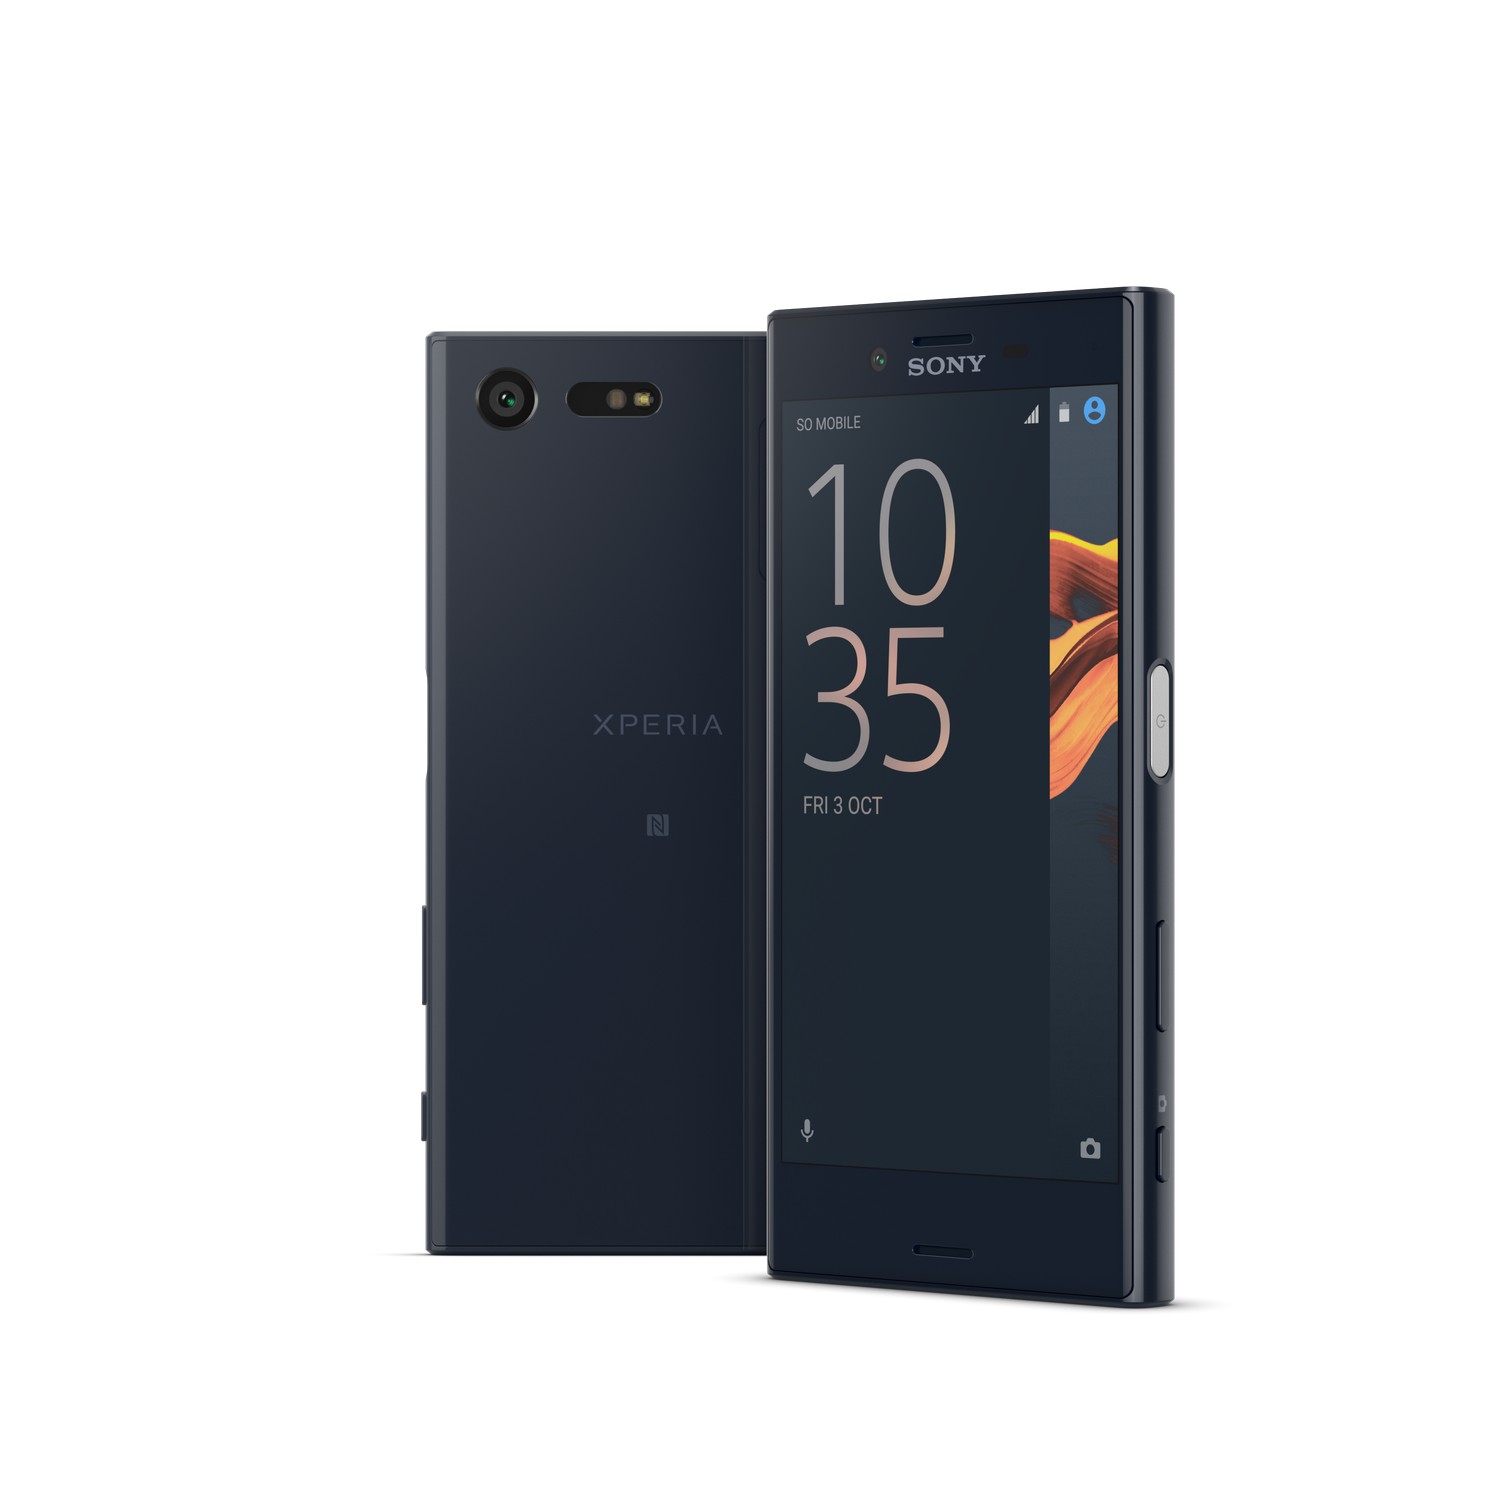 Sony-Xperia-X-Compact (4)